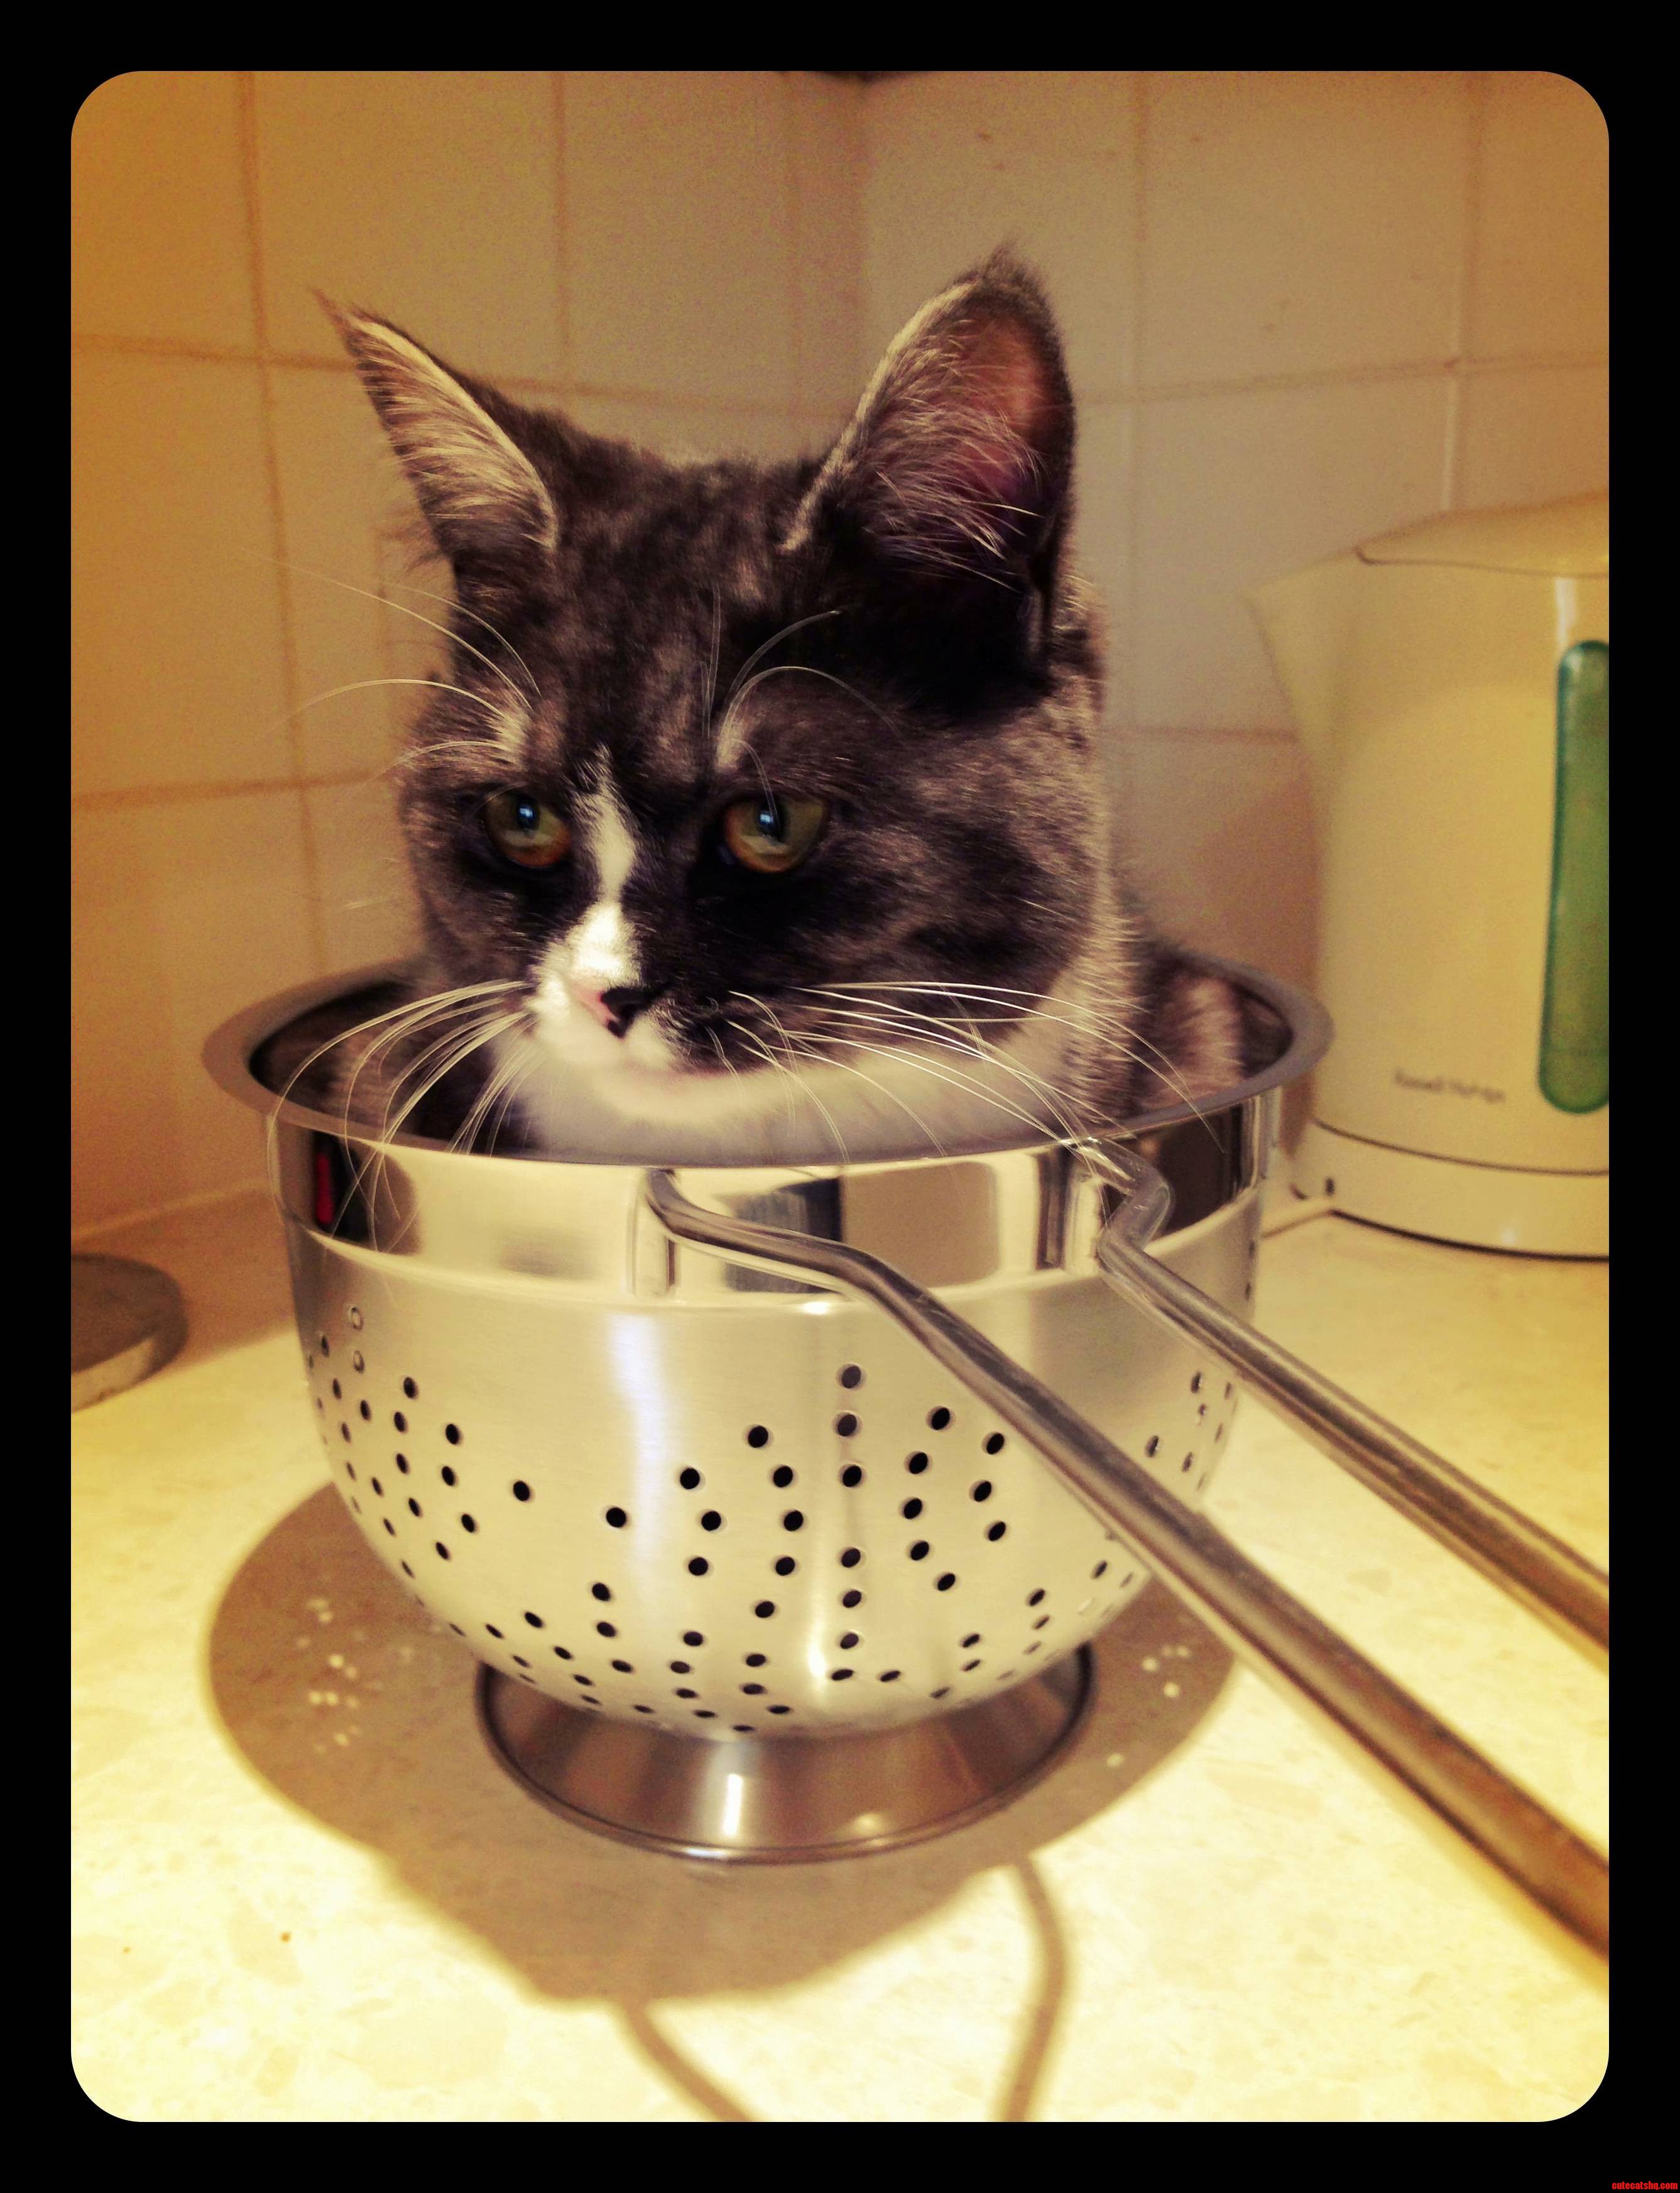 A while ago i bought a new colander. my cat phoebe thought it was marvellous.